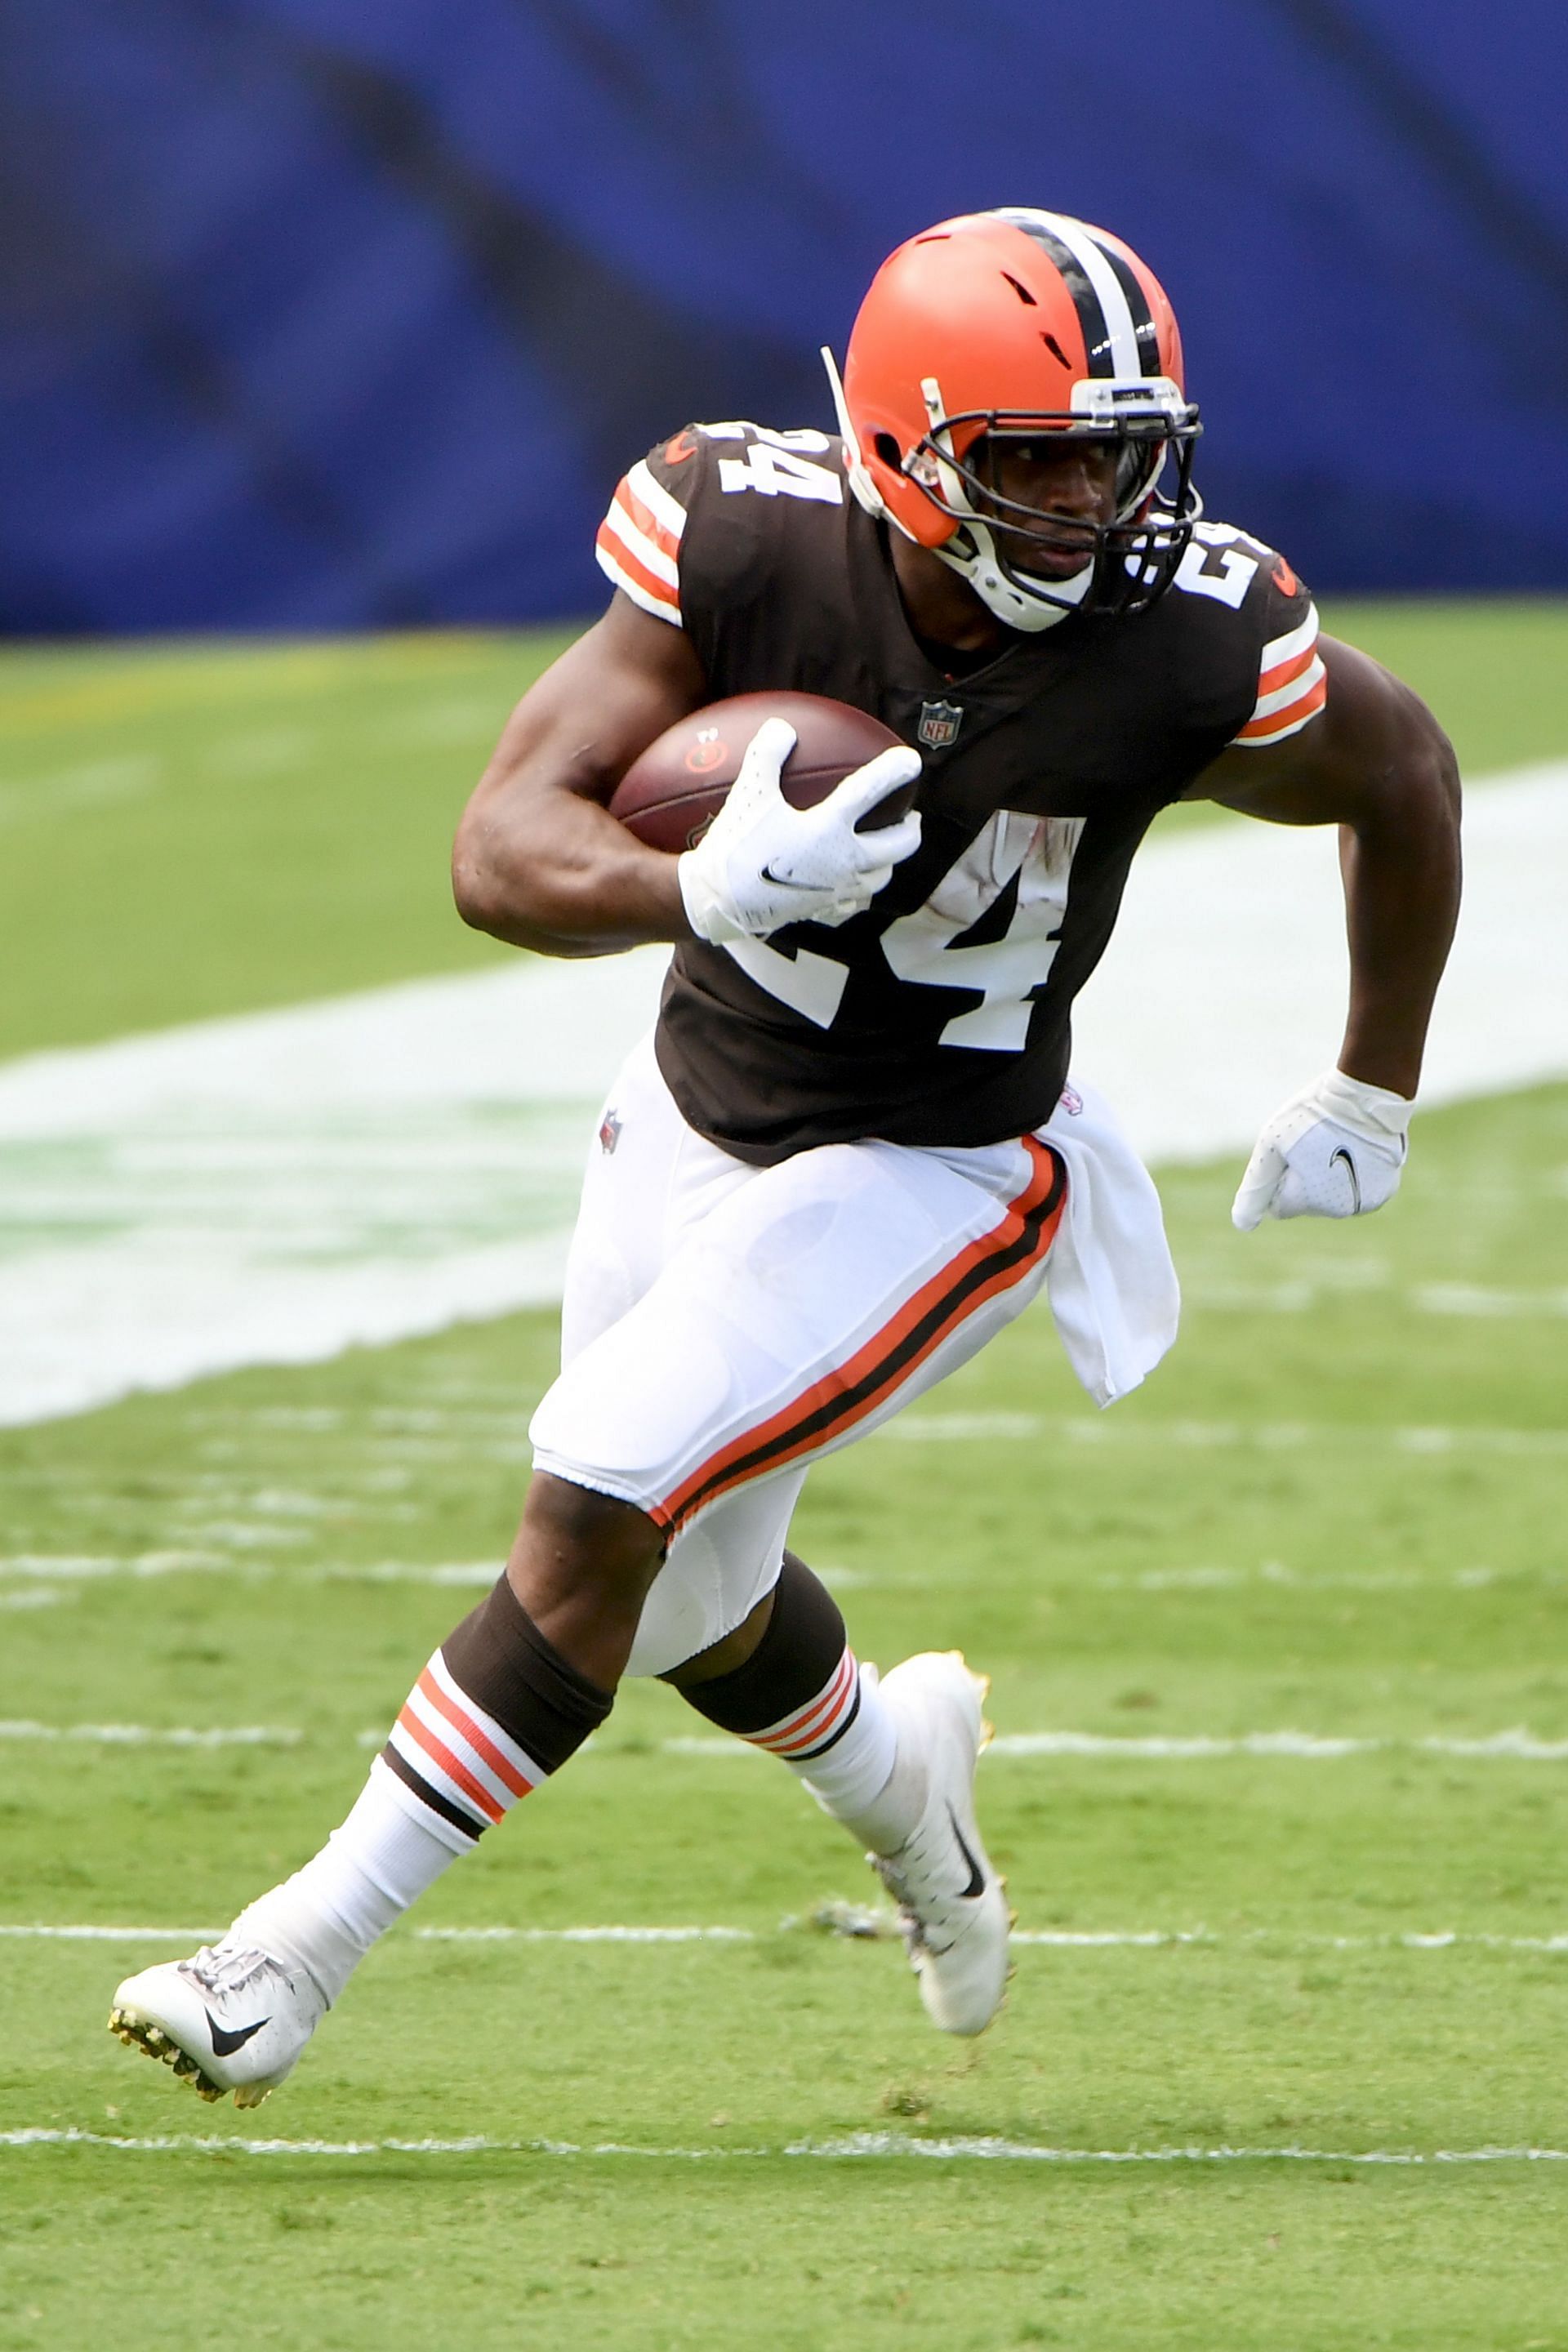 Nick Chubb injury: When will Browns RB return to action?